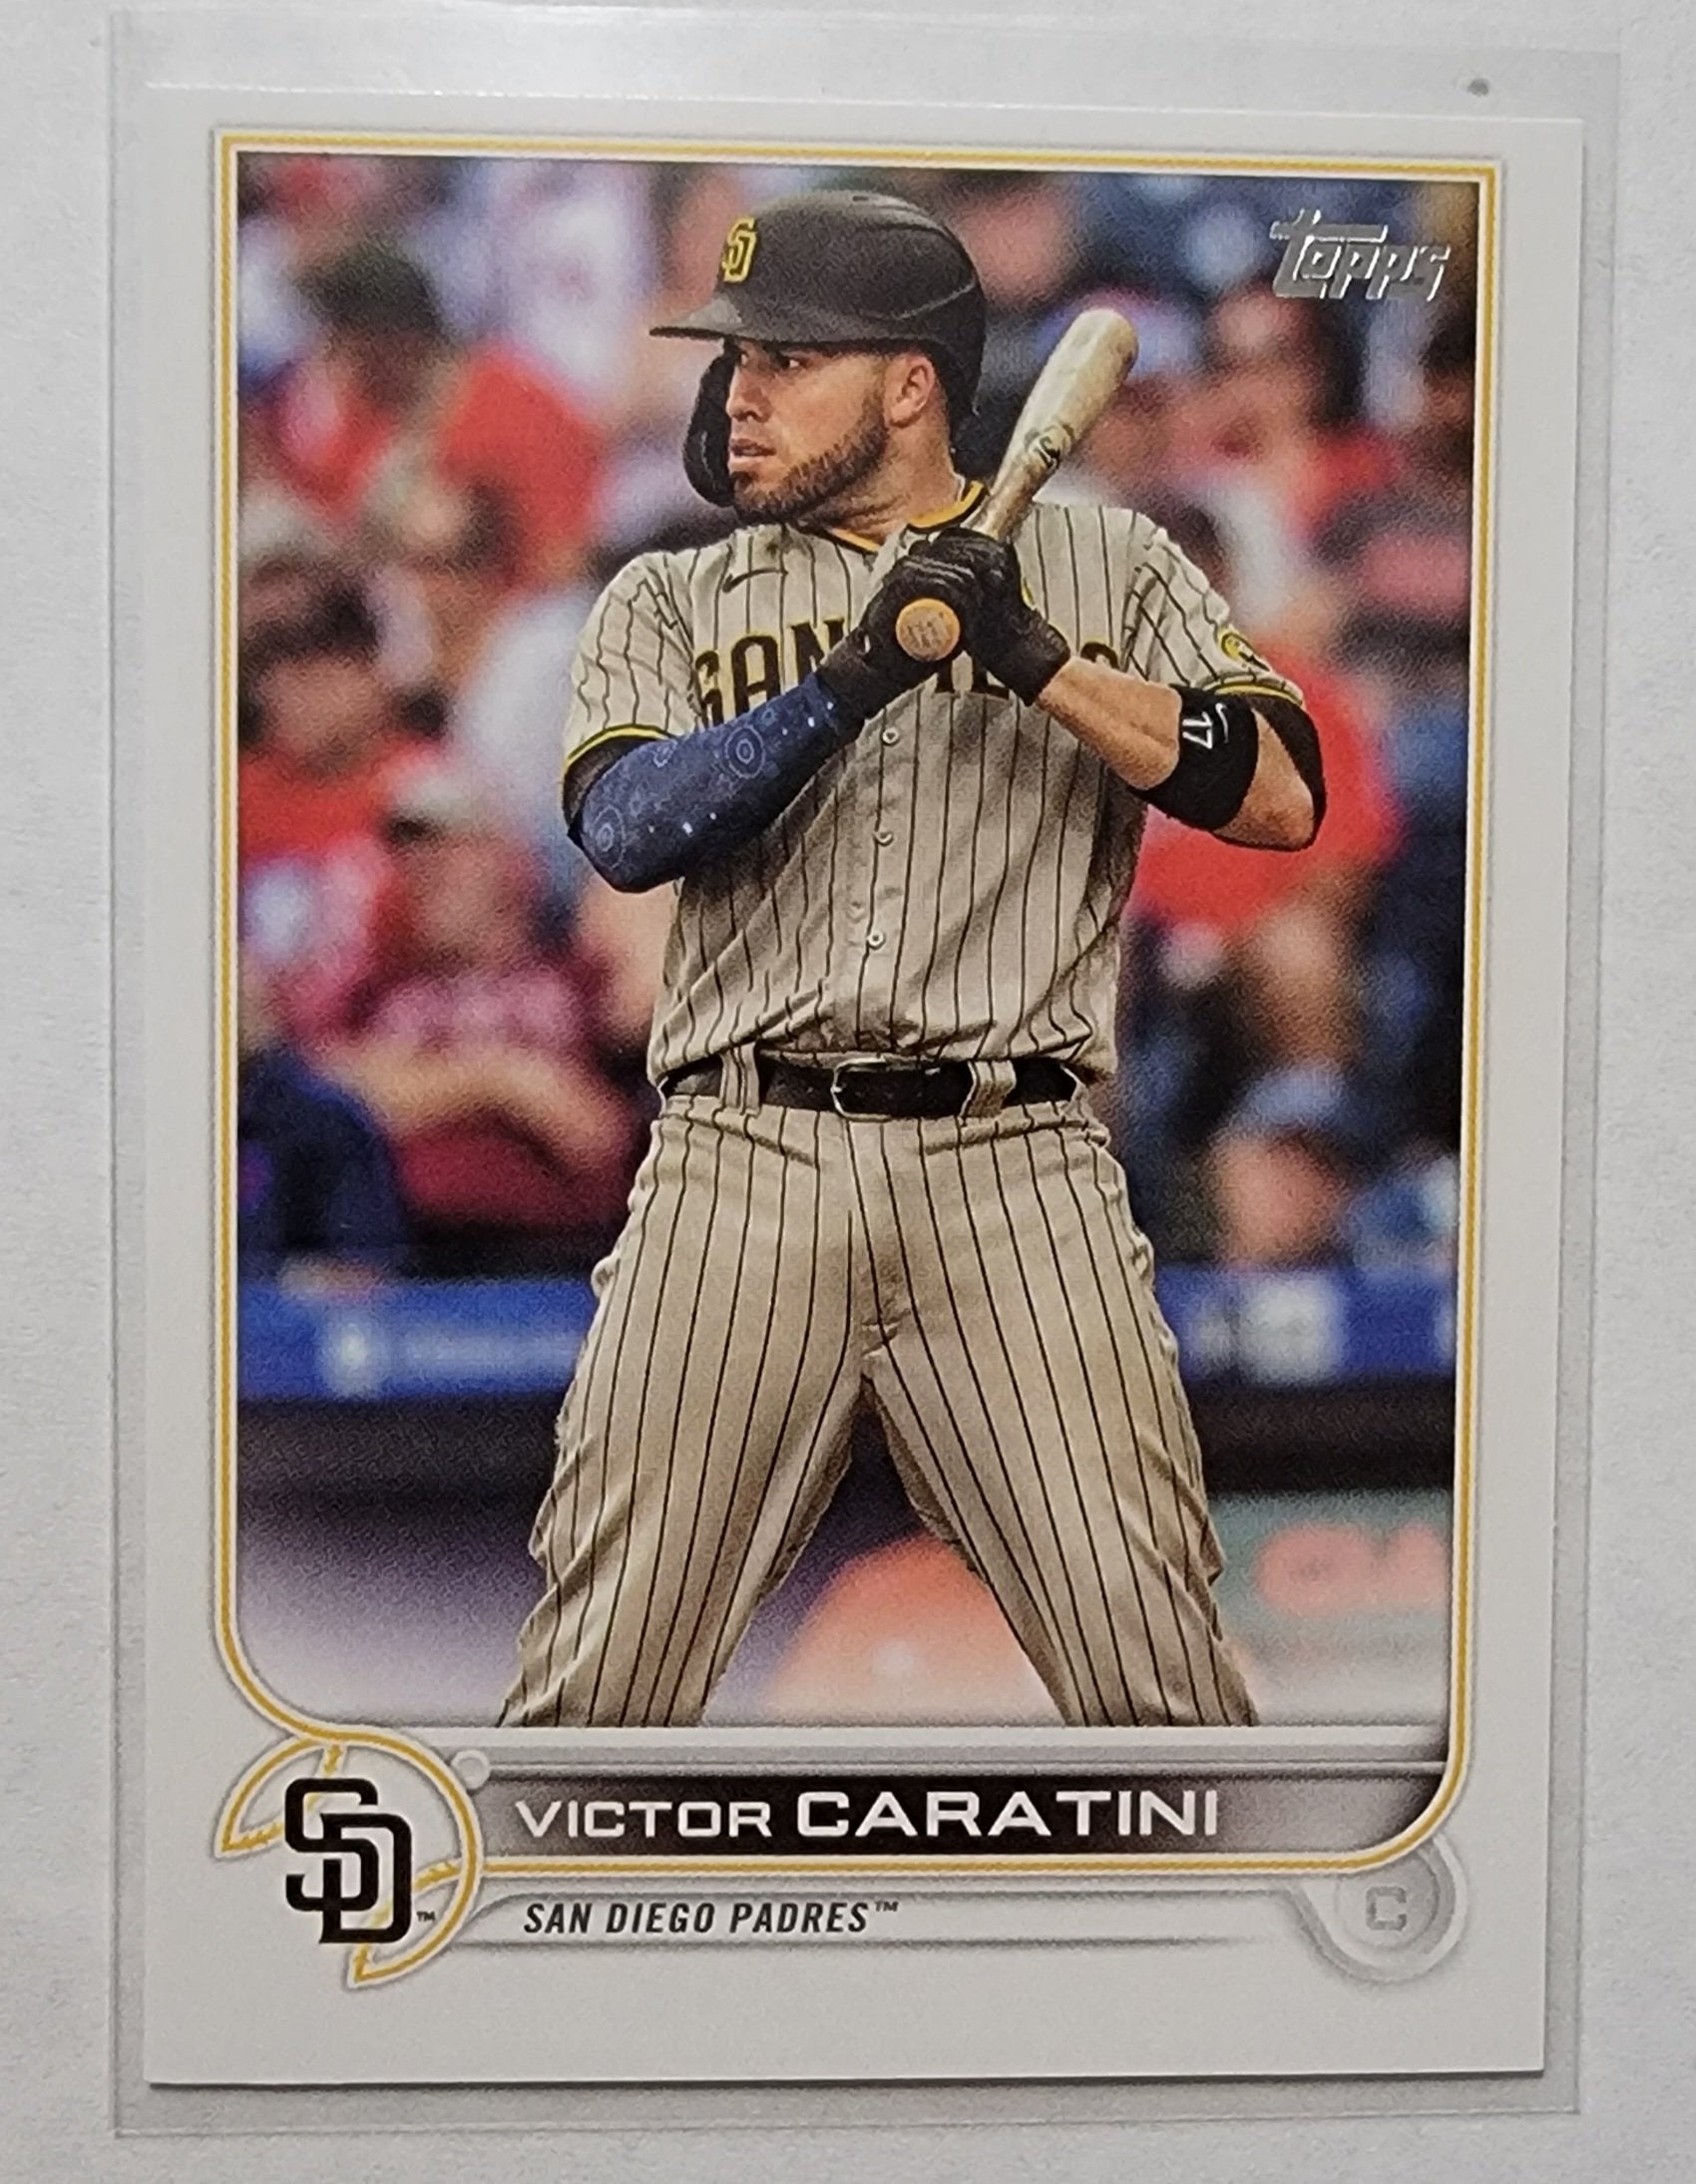 2022 Topps Series 2 Victor Cantini Baseball Card AVM1 simple Xclusive Collectibles   